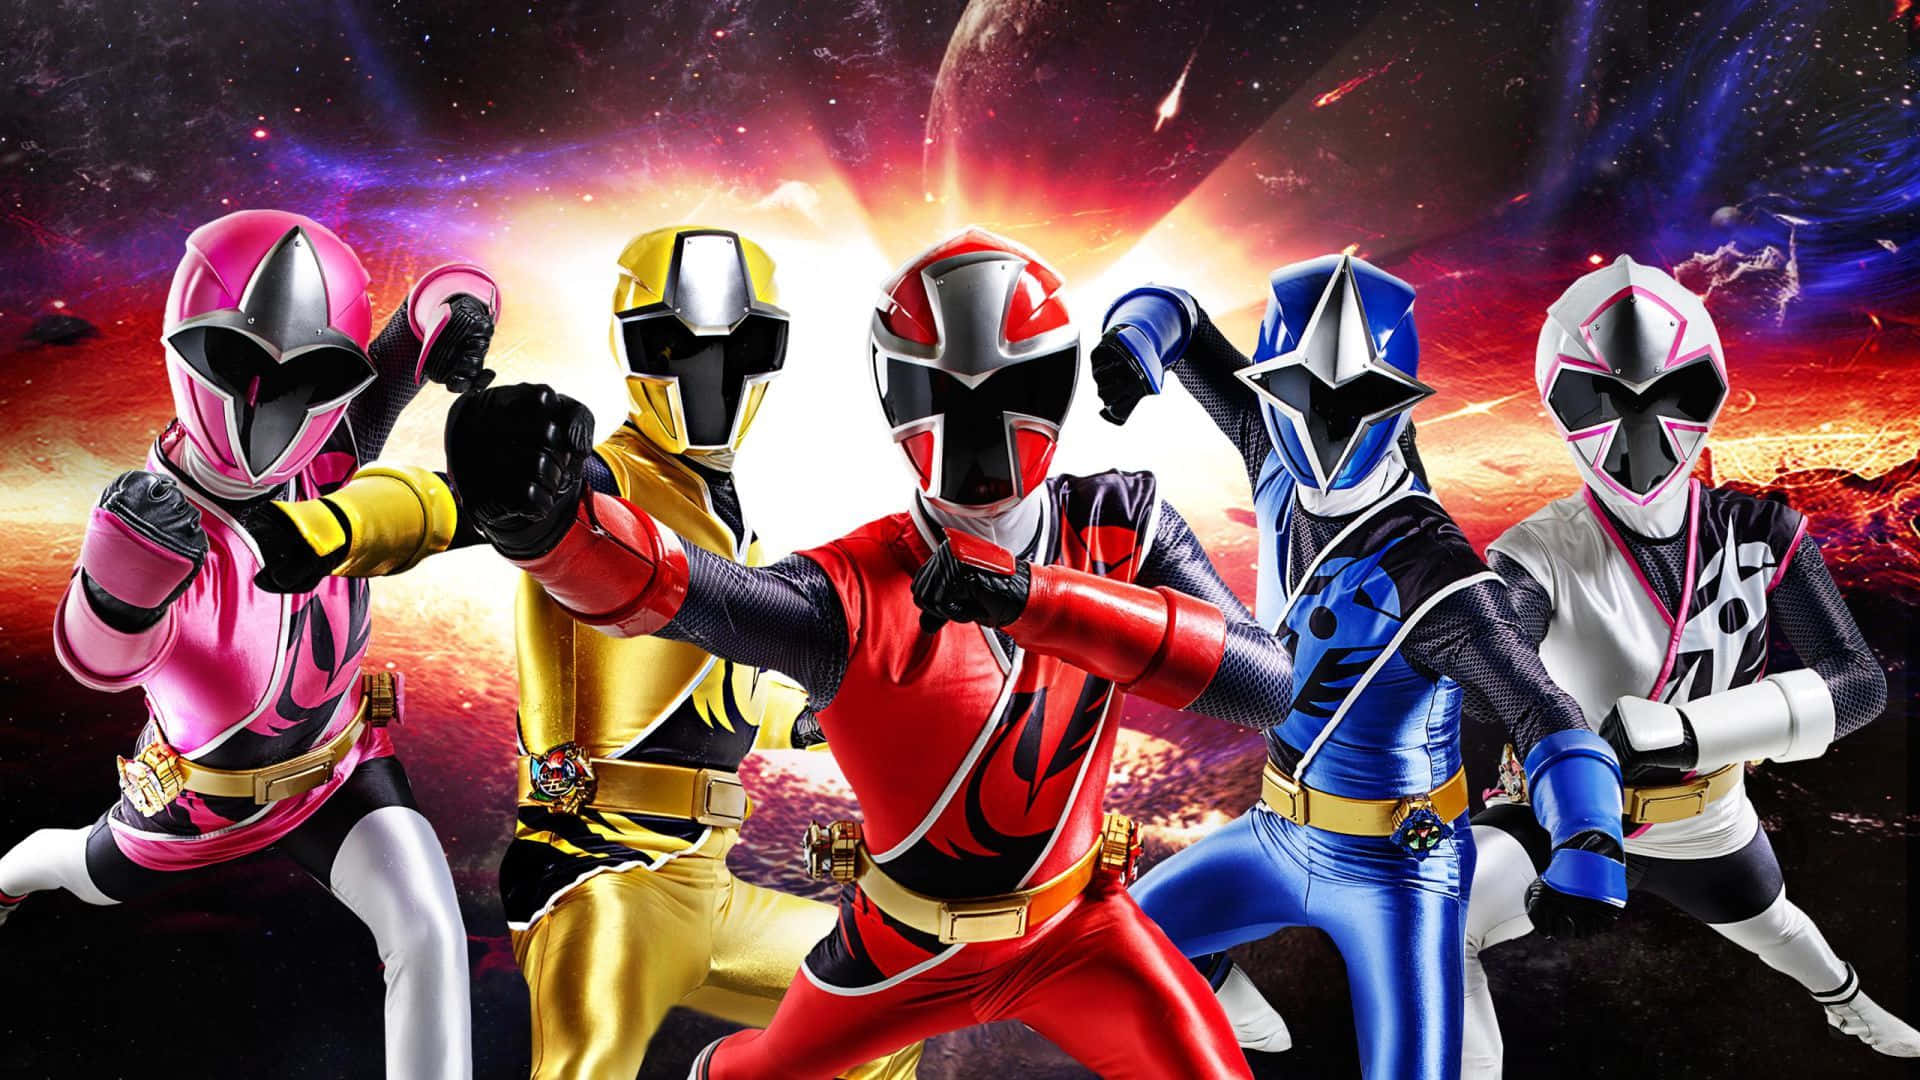 Power Rangers Team United in Action